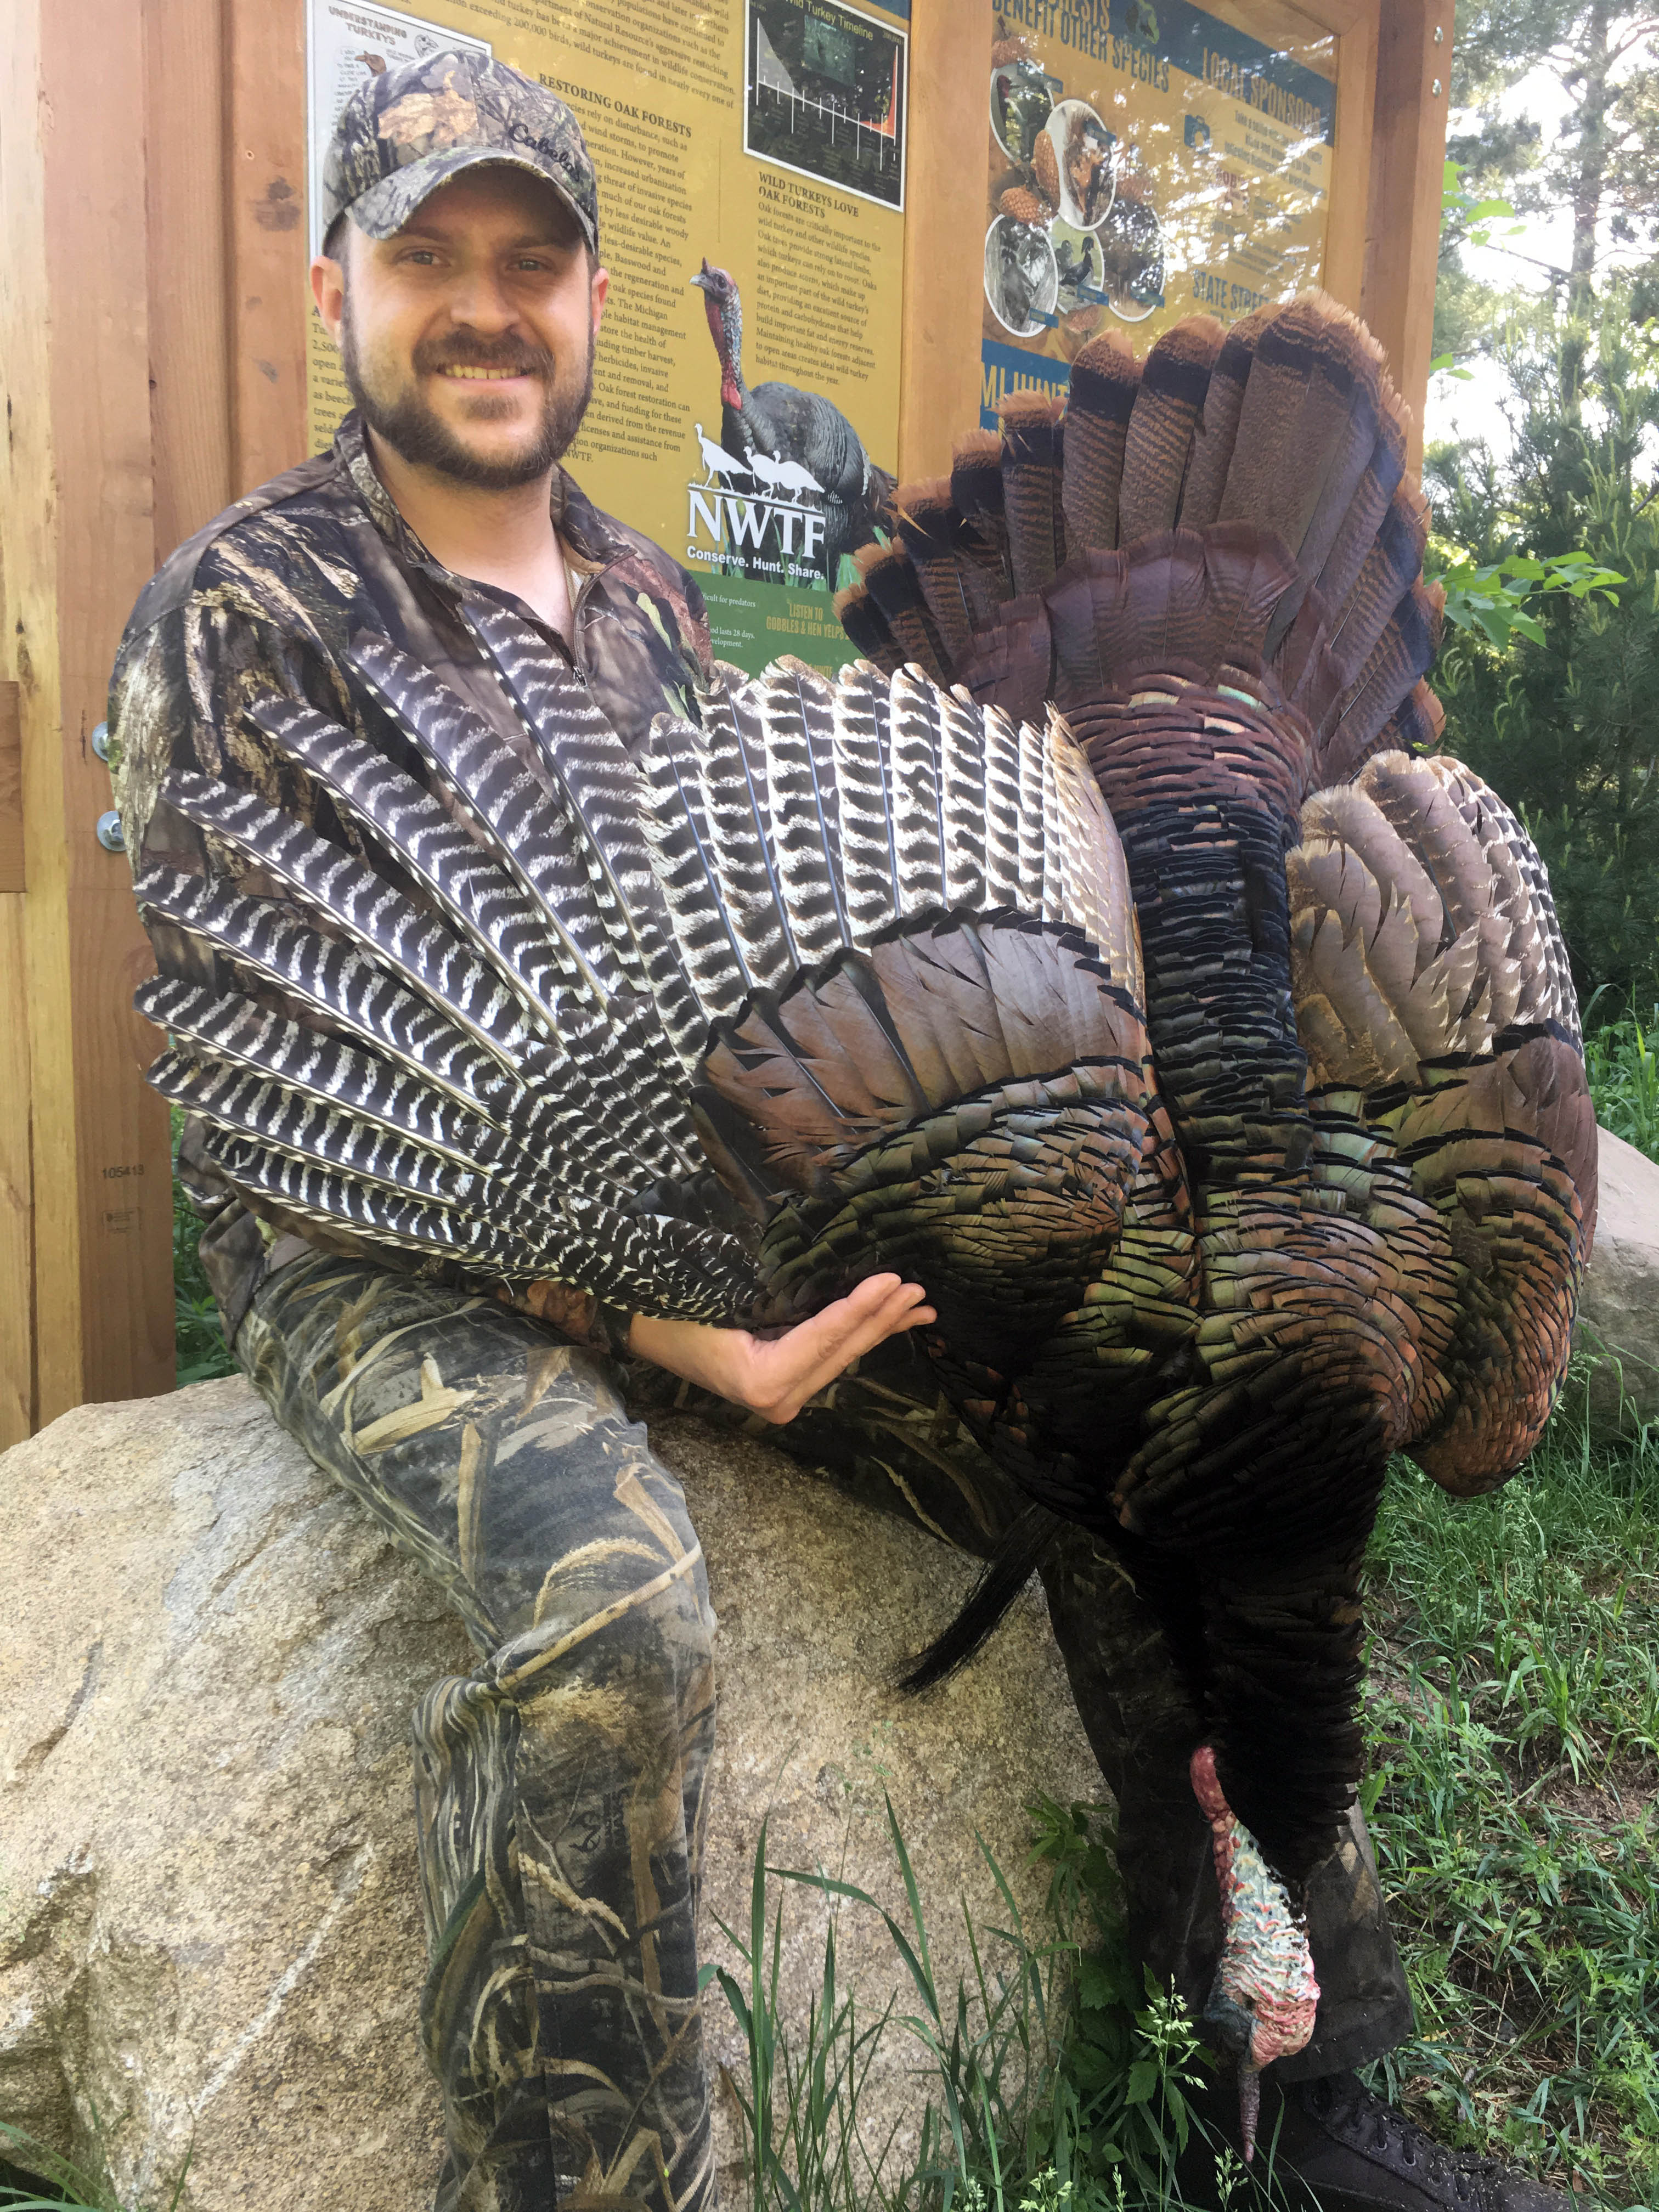 Showcasing the DNR Discover Michigan's Turkey Tracts